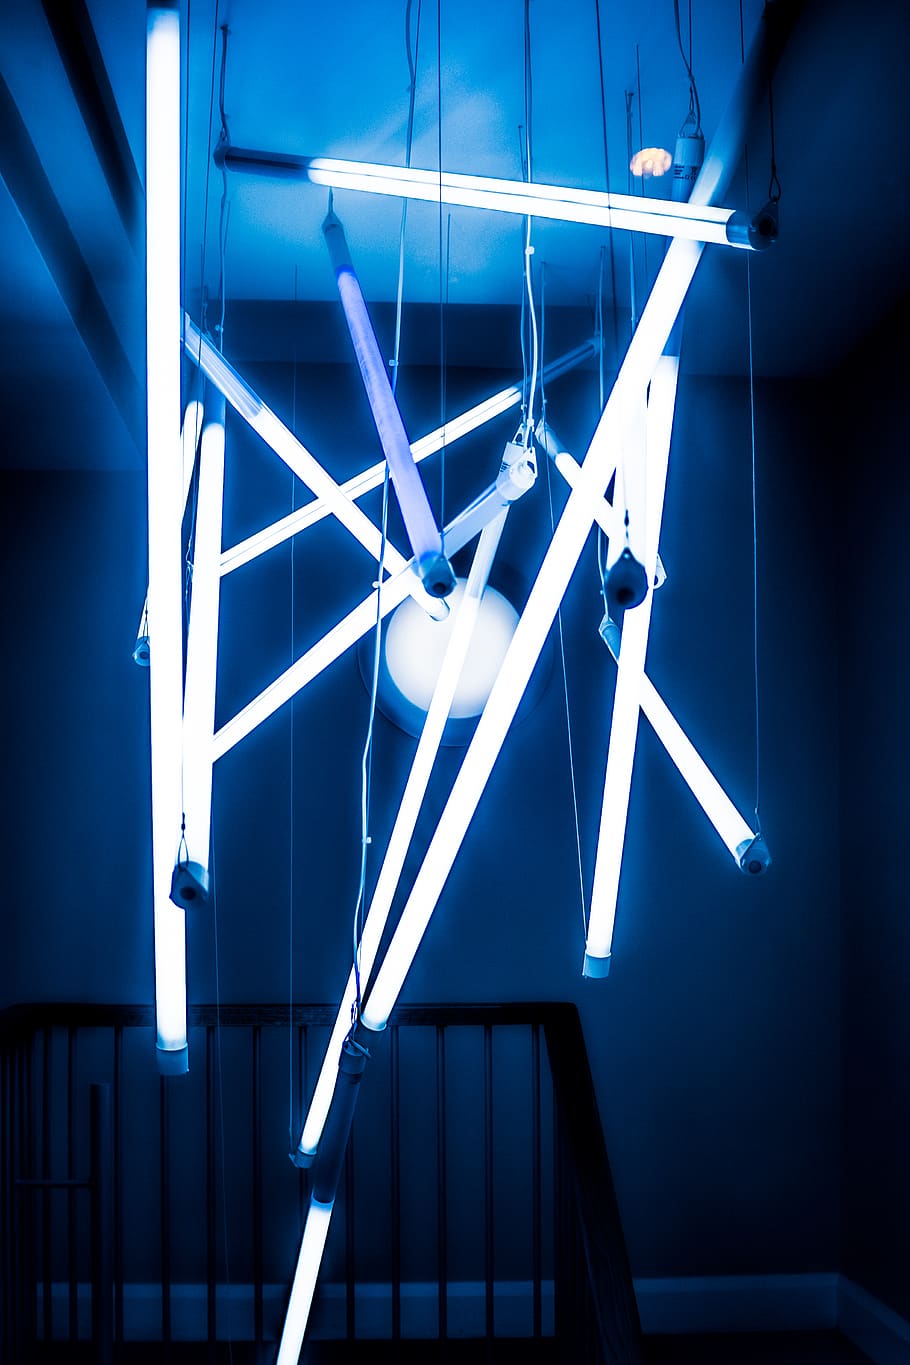 A blue light installation hanging from the ceiling. - Geometry